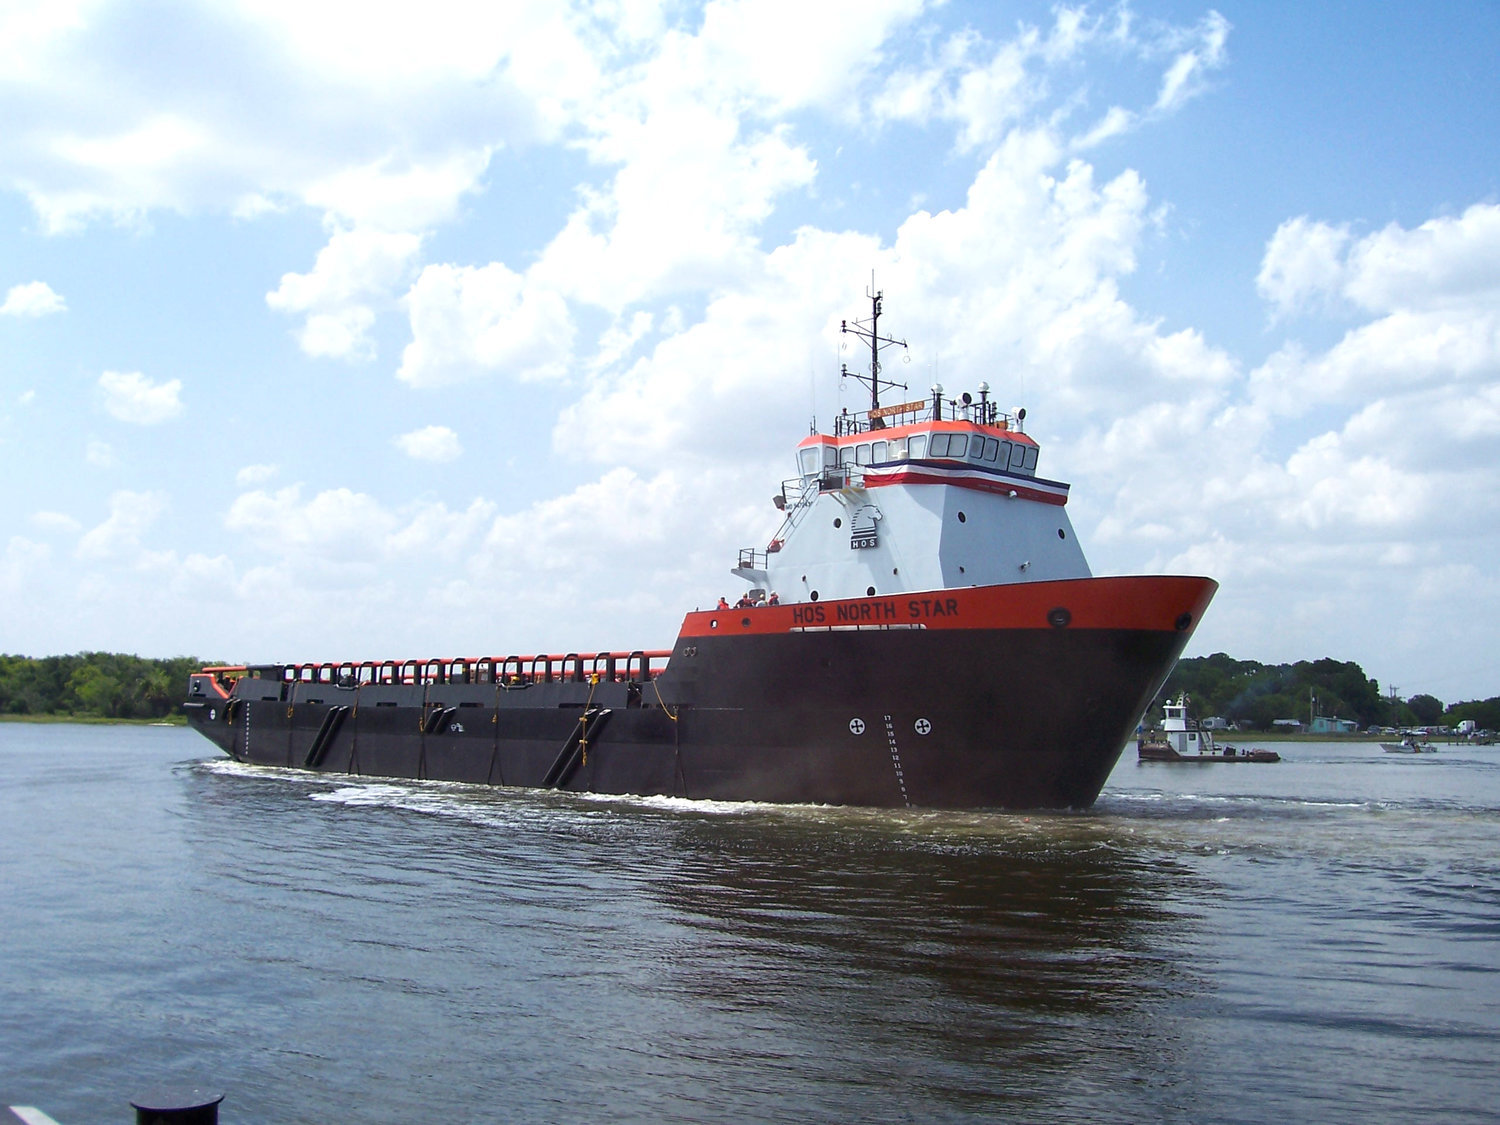 The Steamship Authority purchased the offshore supply vessel North Star to convert it into a freight boat.